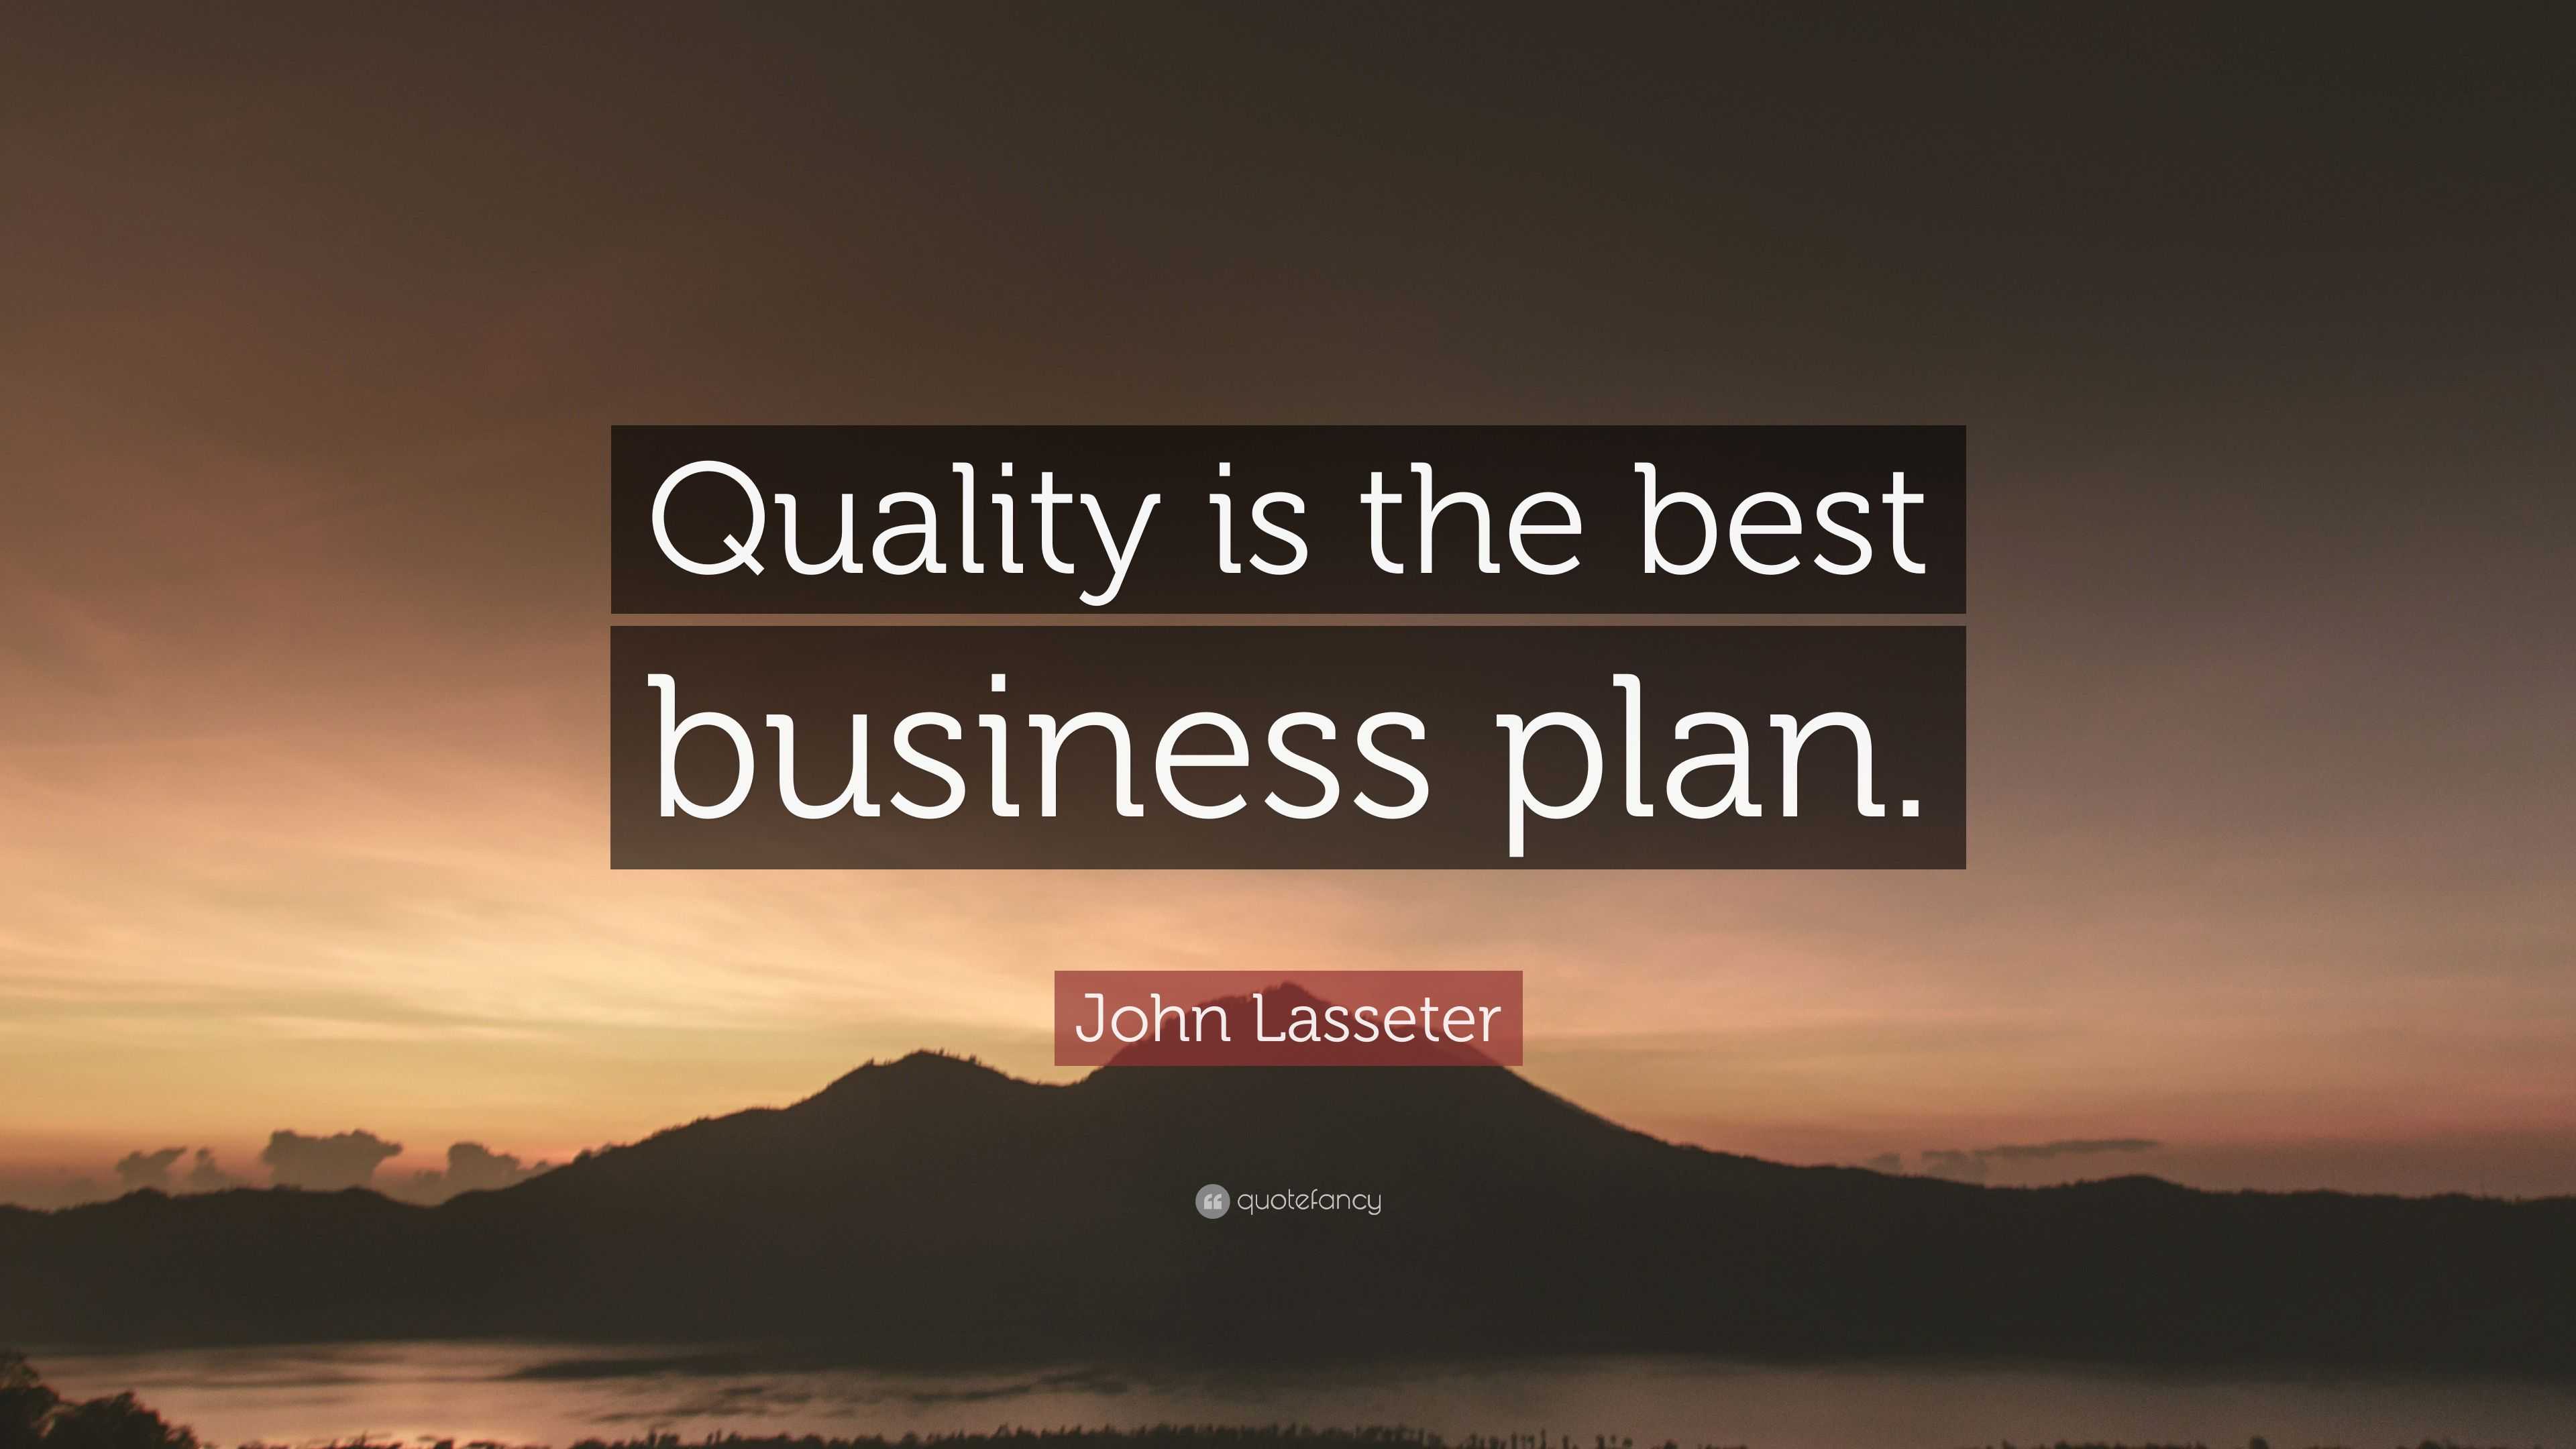 john lasseter quality is the best business plan